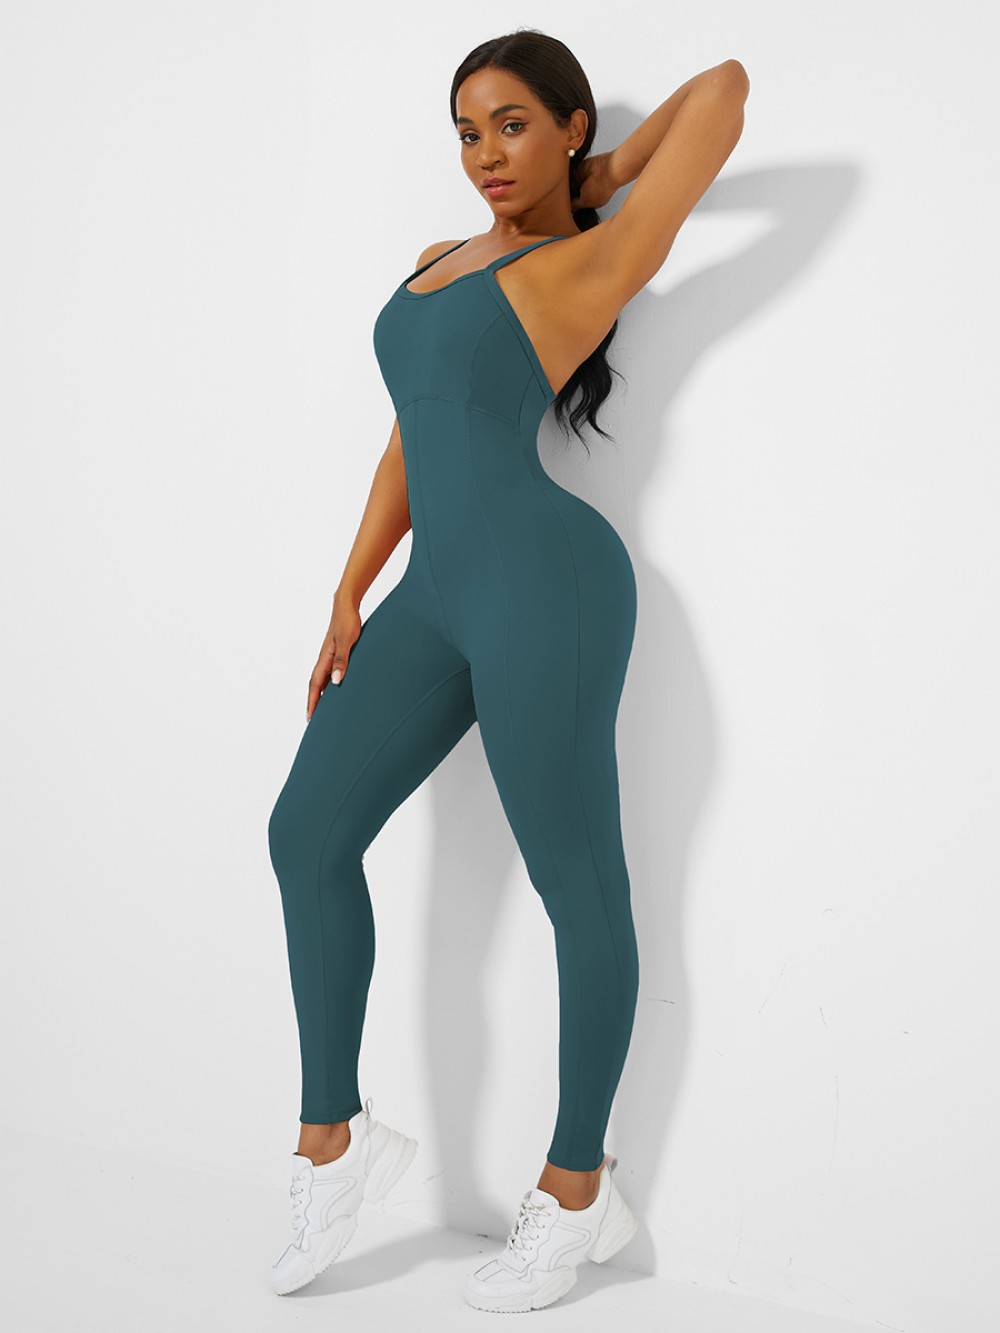 Blue Cross Back Pleated Sling Athletic Jumpsuit For Fitness